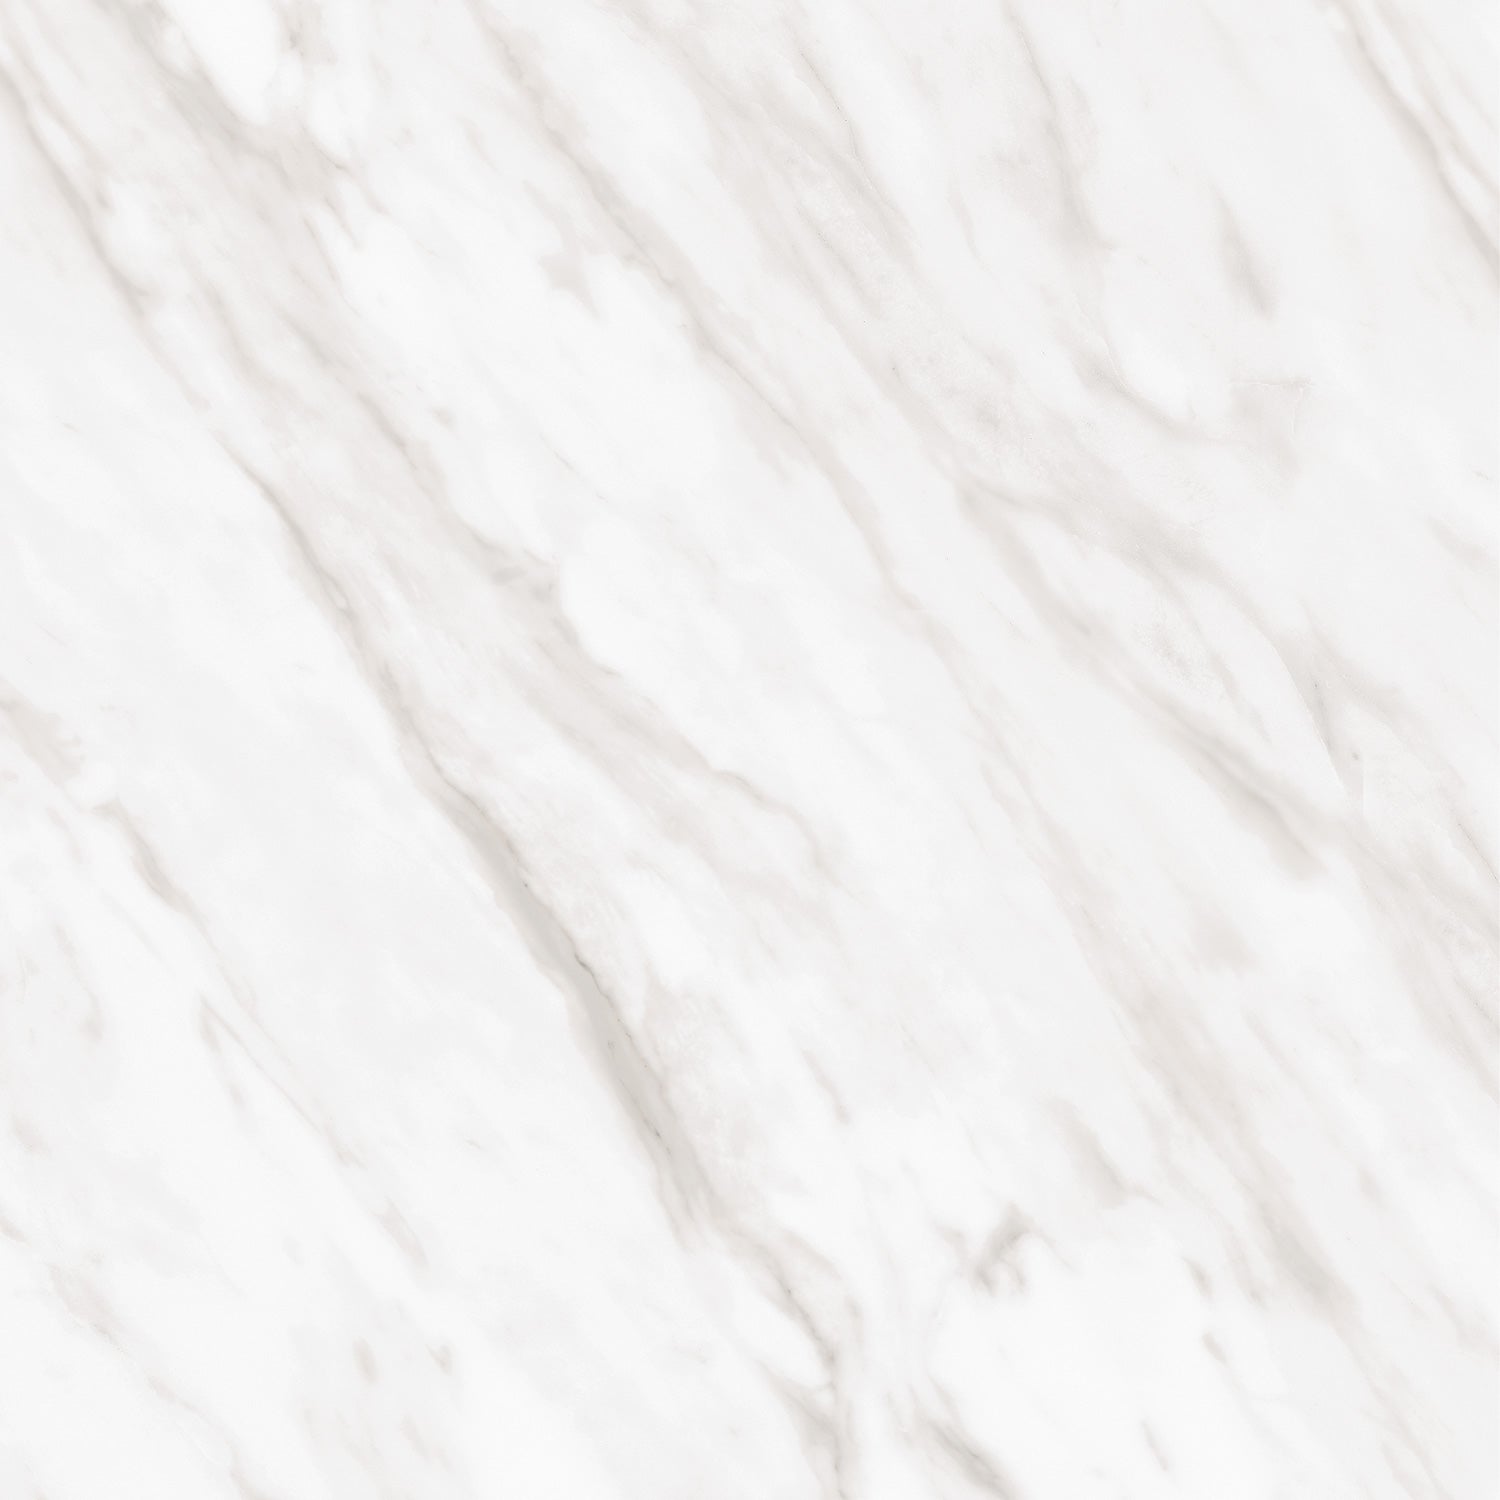 Daltile - Perpetuo - 12 in. x 12 in. Glazed Porcelain Floor Tile - Timeless White Polished